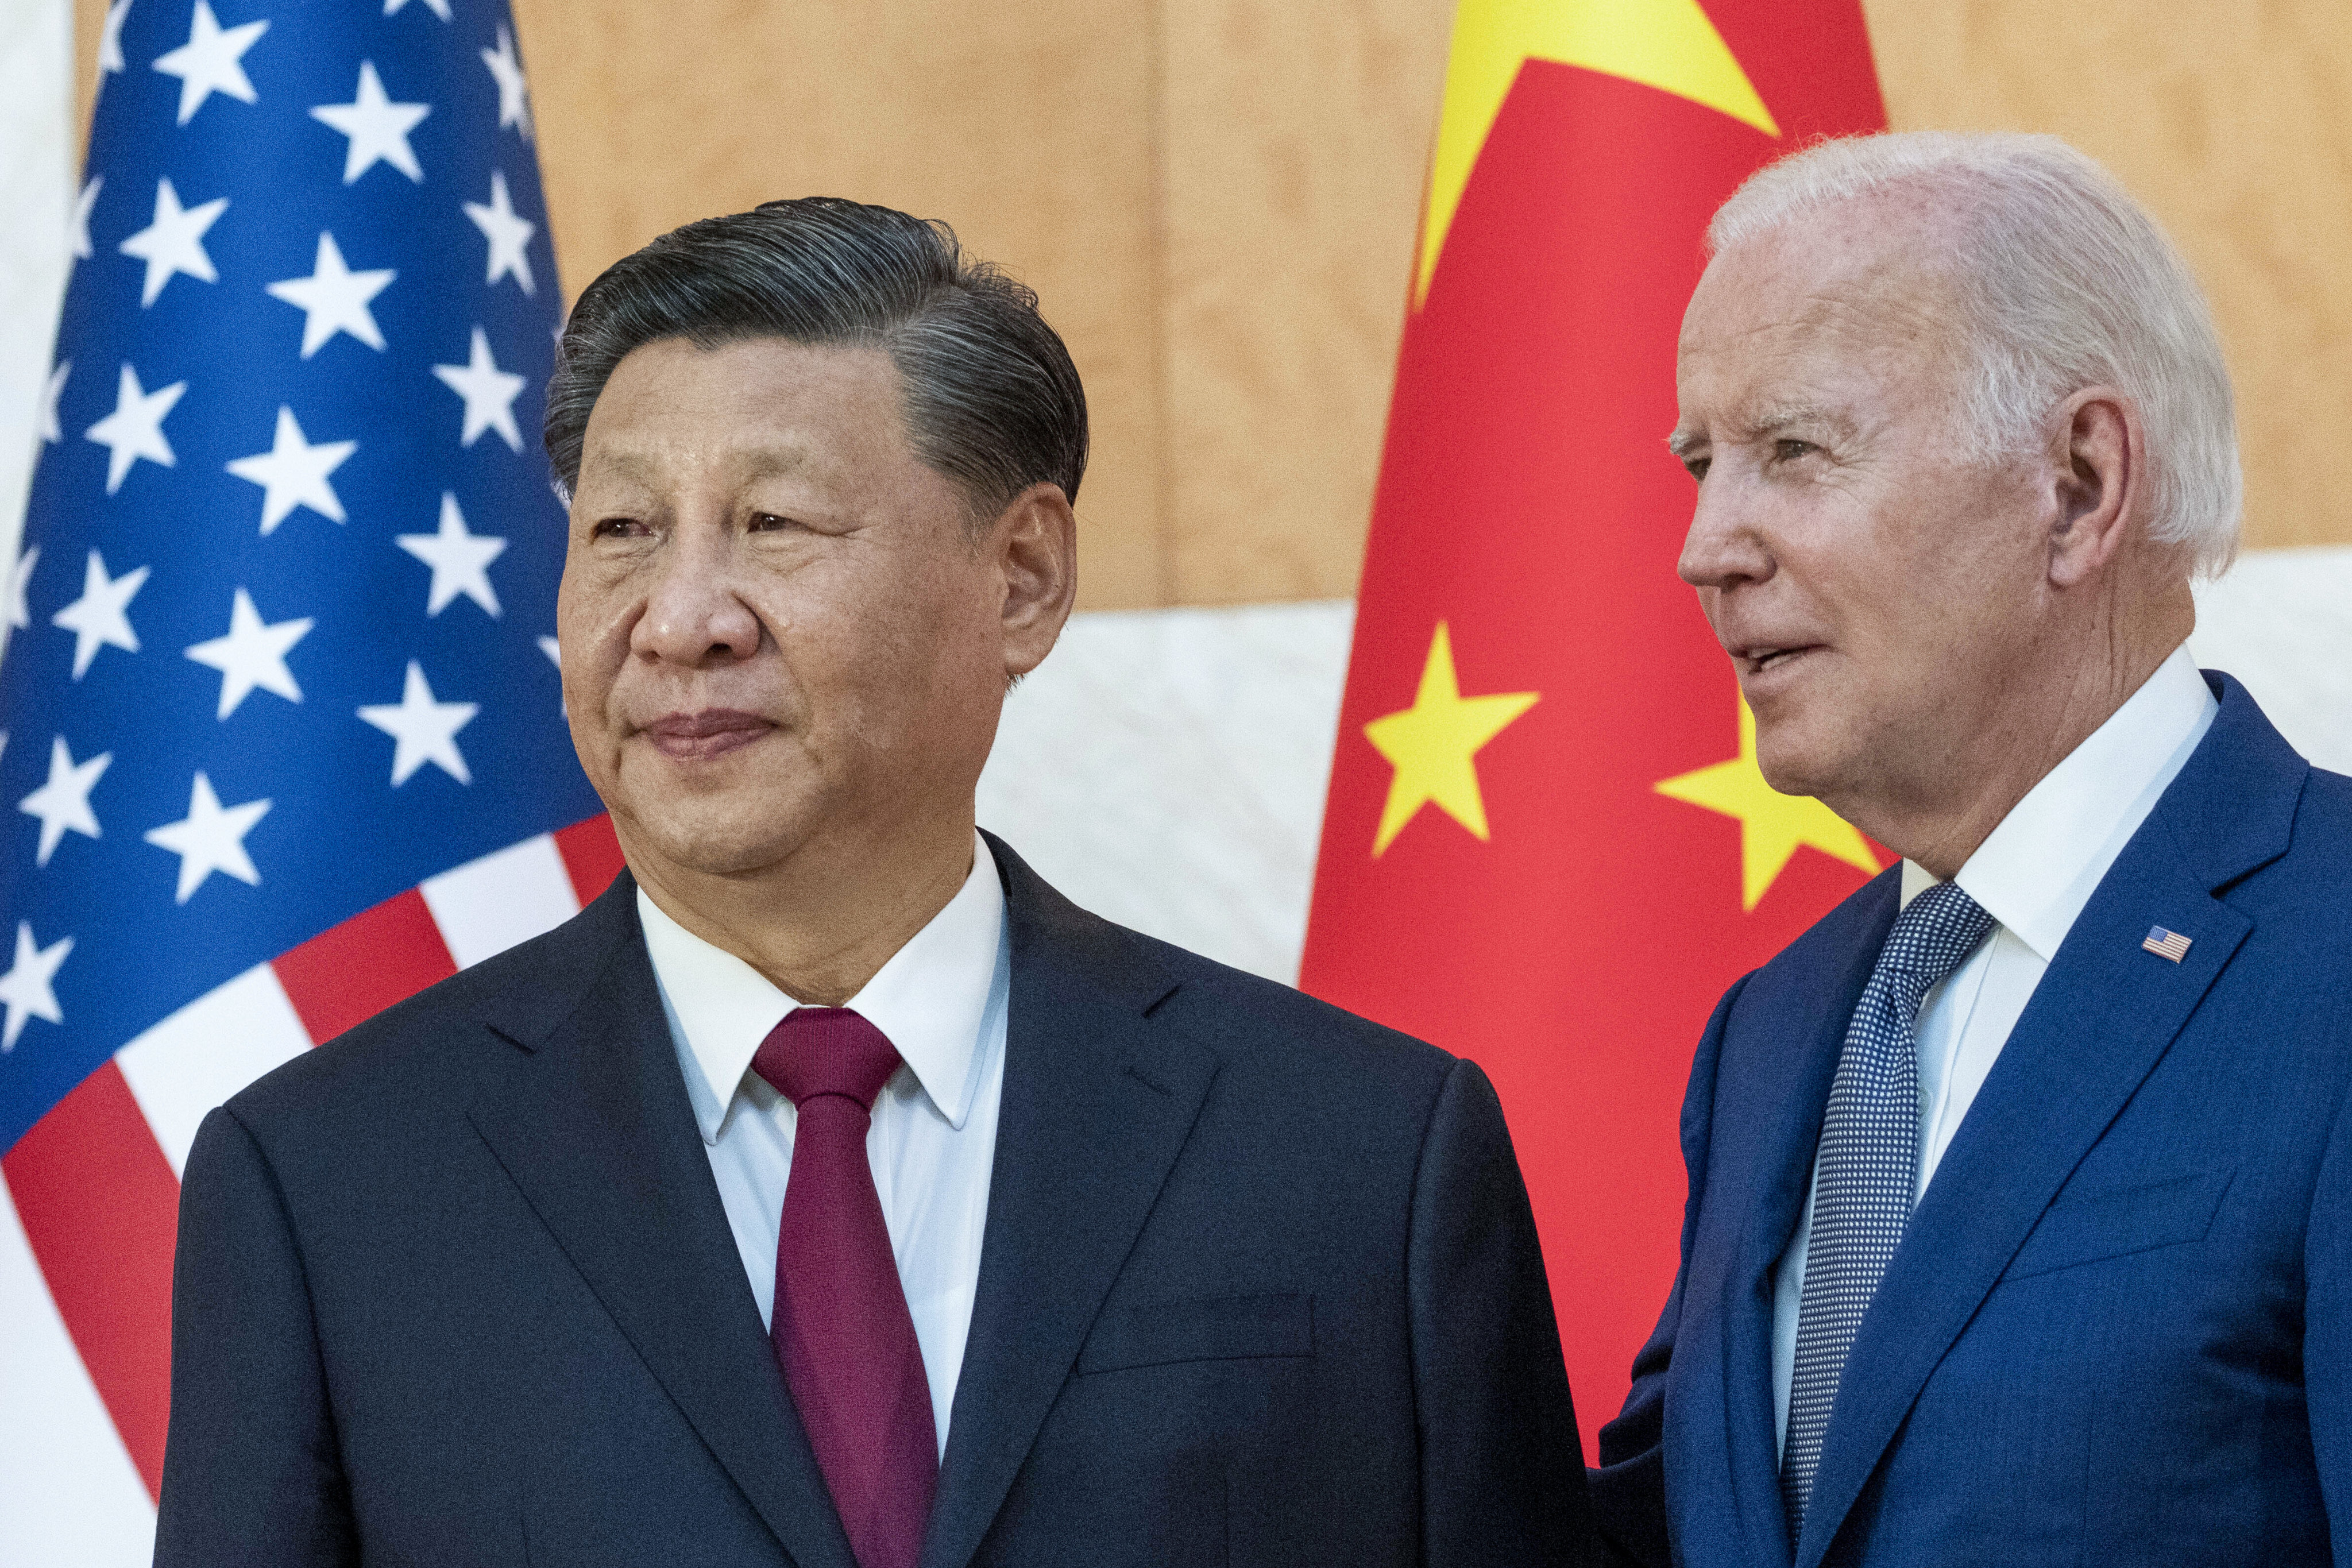 US President Joe Biden, right, stands with Chinese President Xi Jinping at the G20 summit in Bali, November 2022. Photo: AP